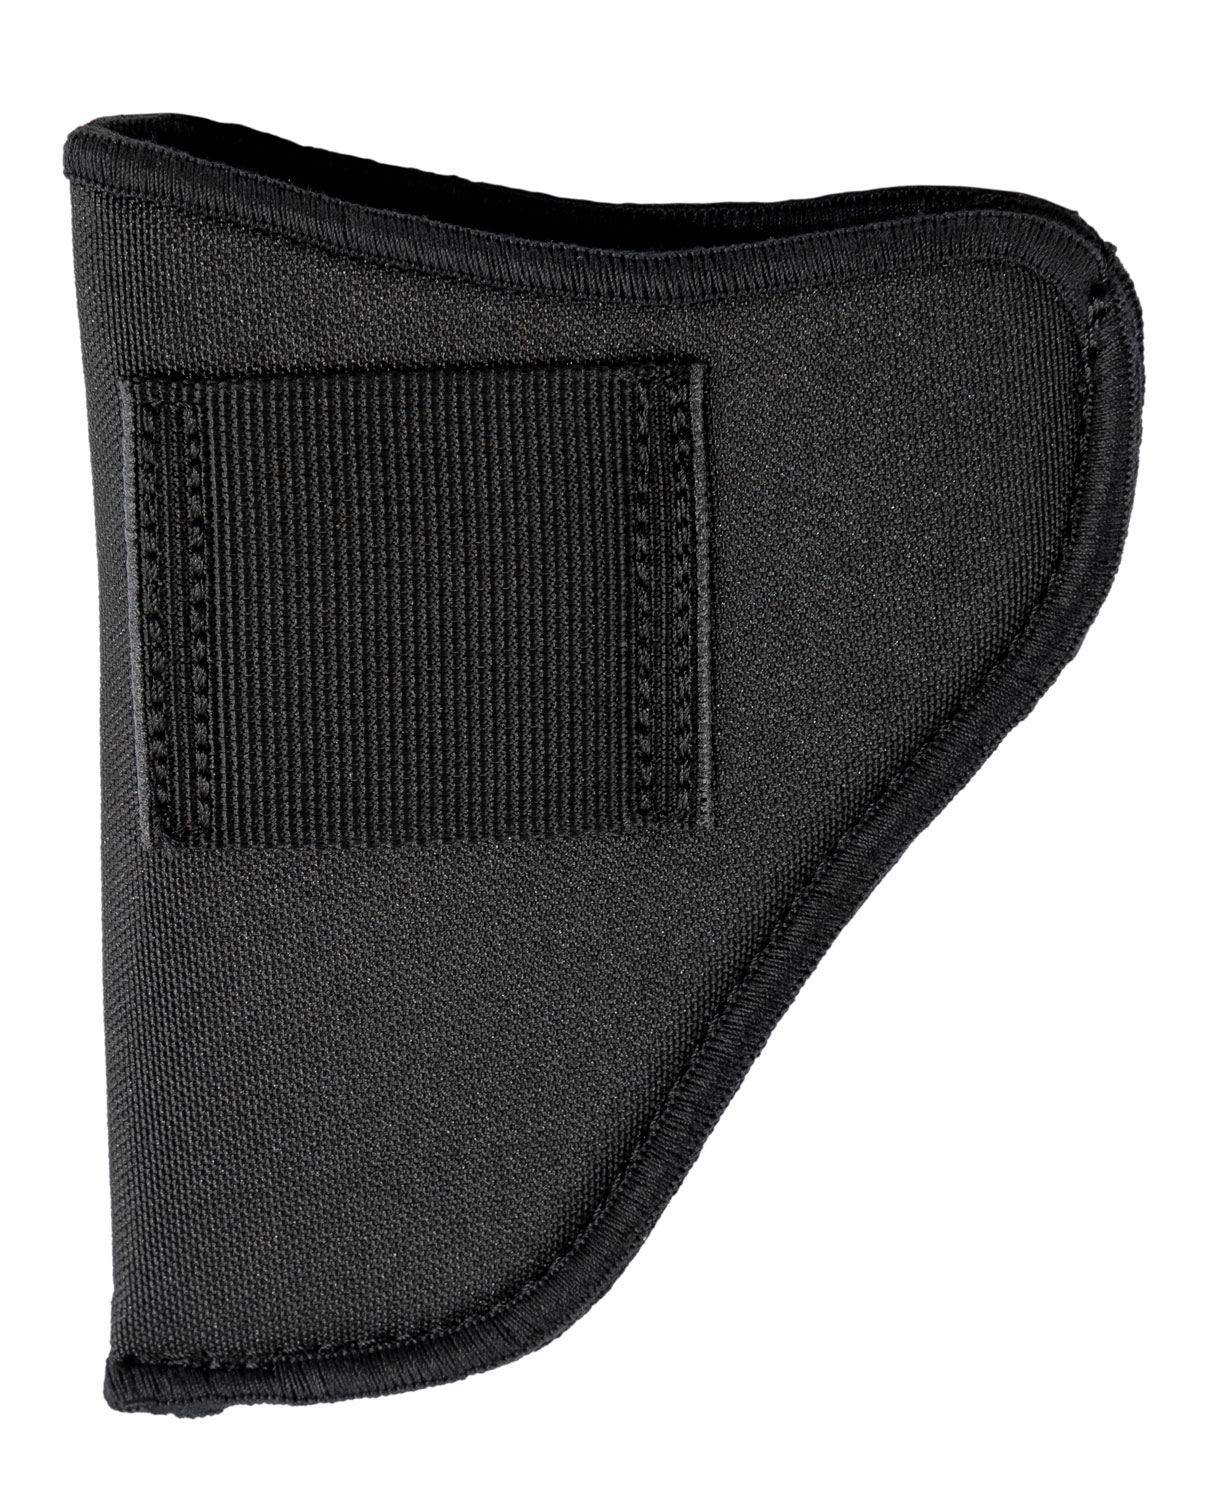 Uncle Mikes 21112 GunMate Hip Holster Size 12 made of Tri-Laminate with Black Finish & Belt Loop Mount Type fits 4-5